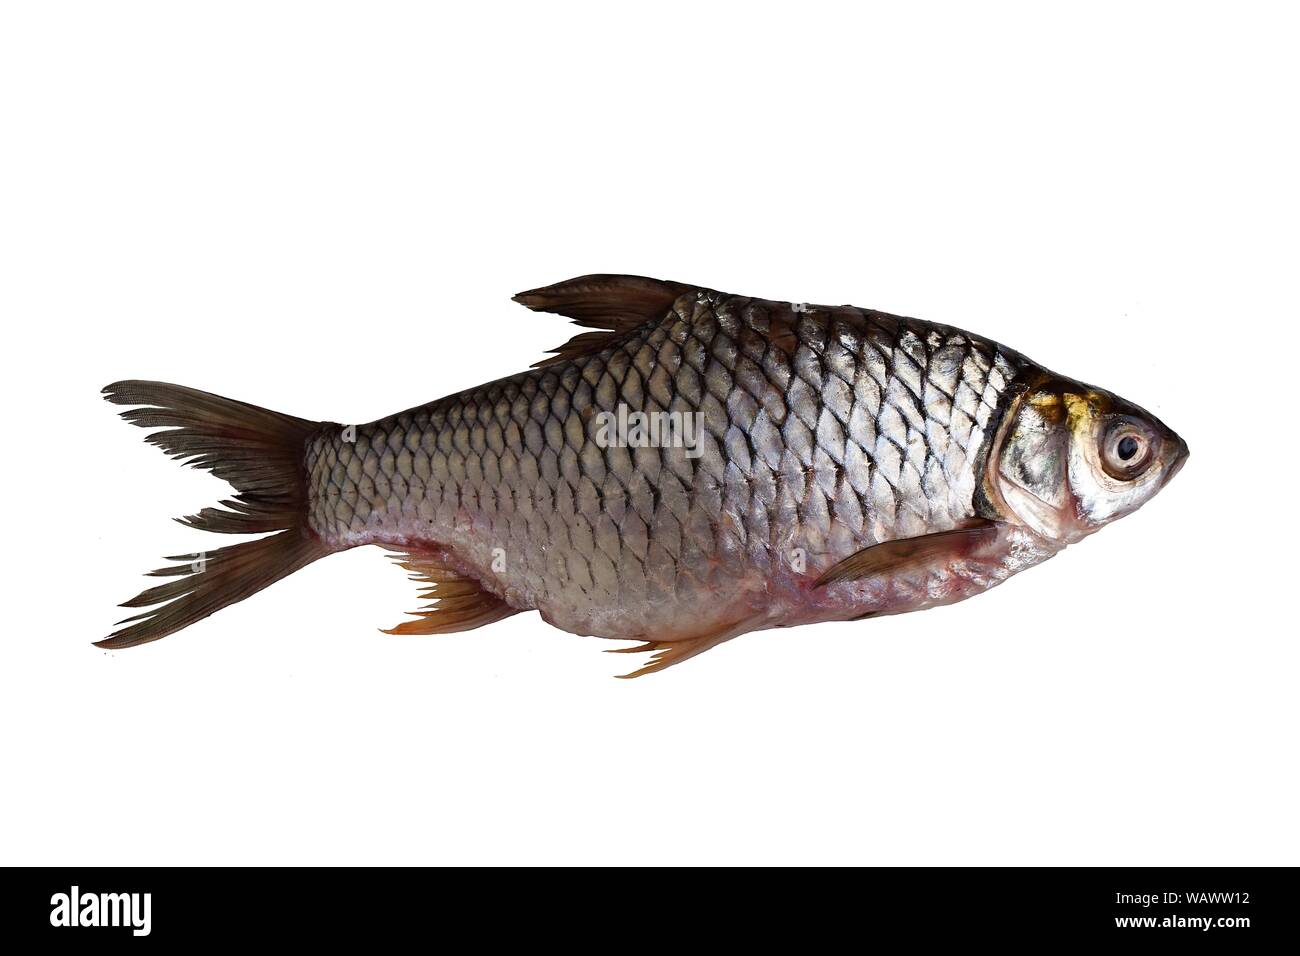 Java barb, Fish isolated on white background, Important aquacultur freshwater species in Thailand Stock Photo